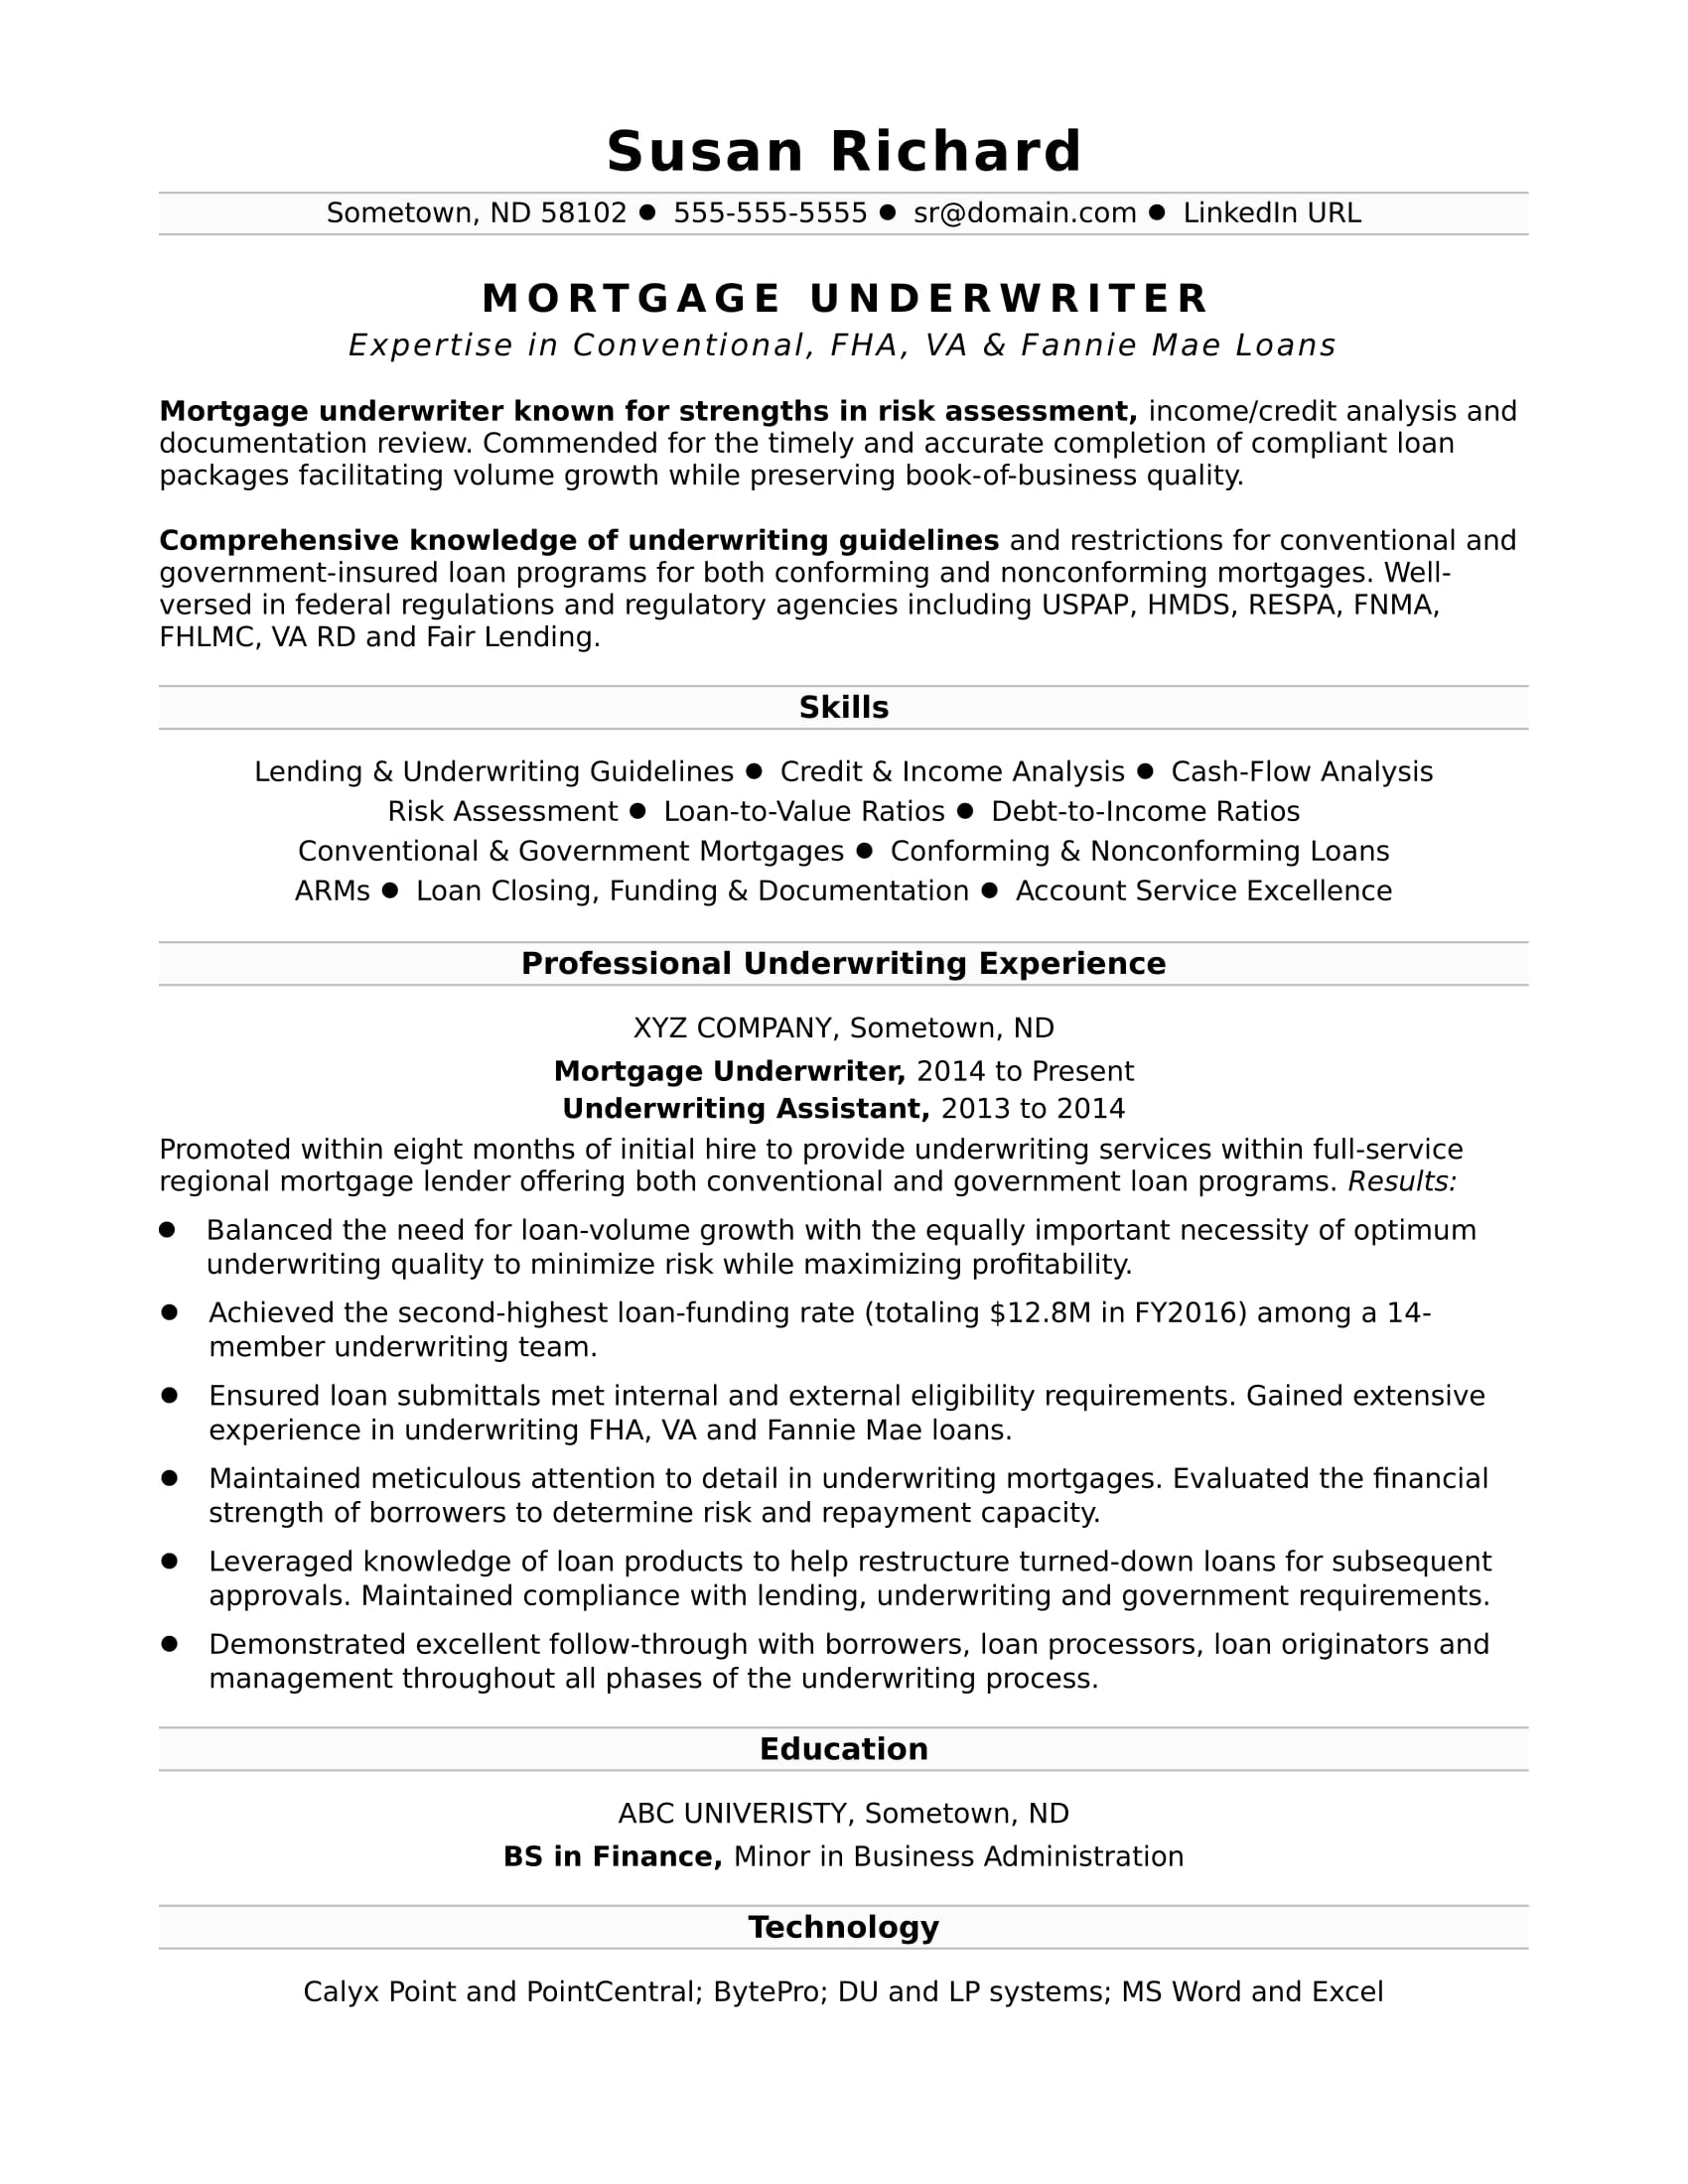 Mortgage Reference Letter From Employer Template - Mortgage Underwriter Resume Sample